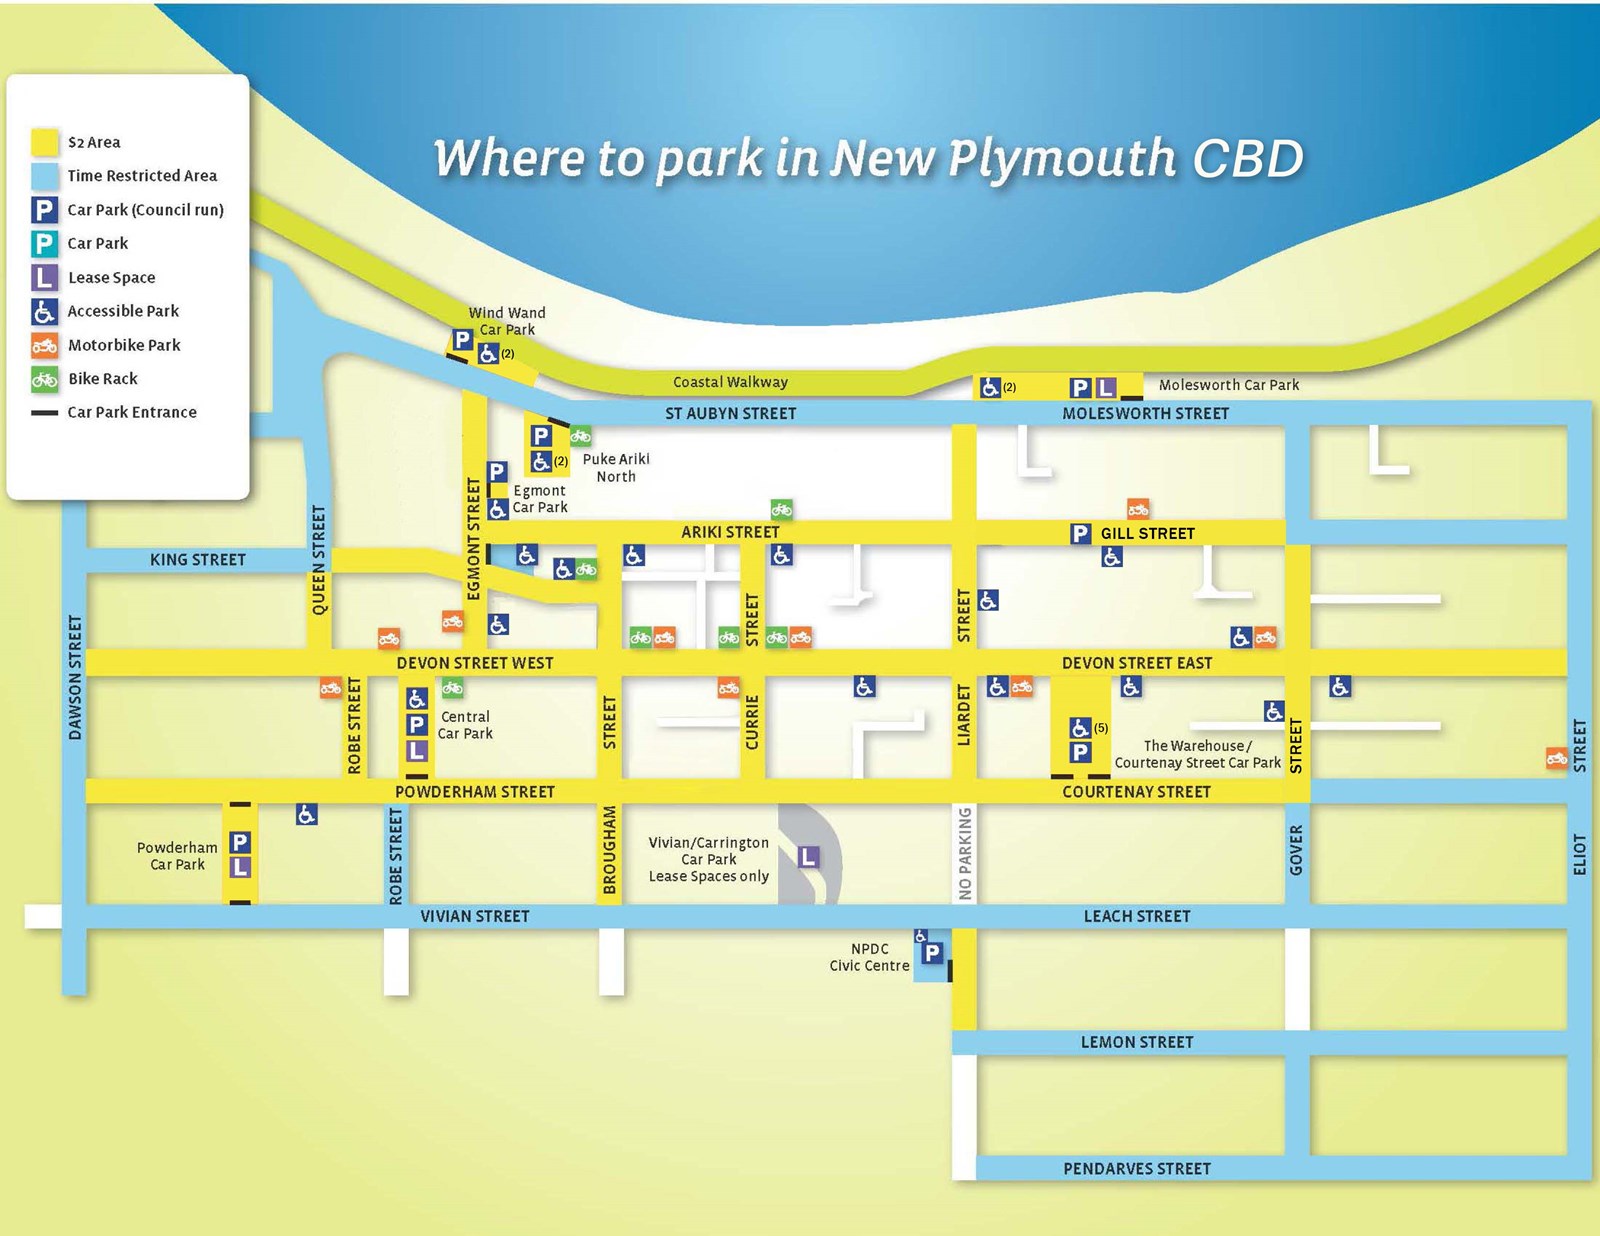 Where to park in New Plymouth